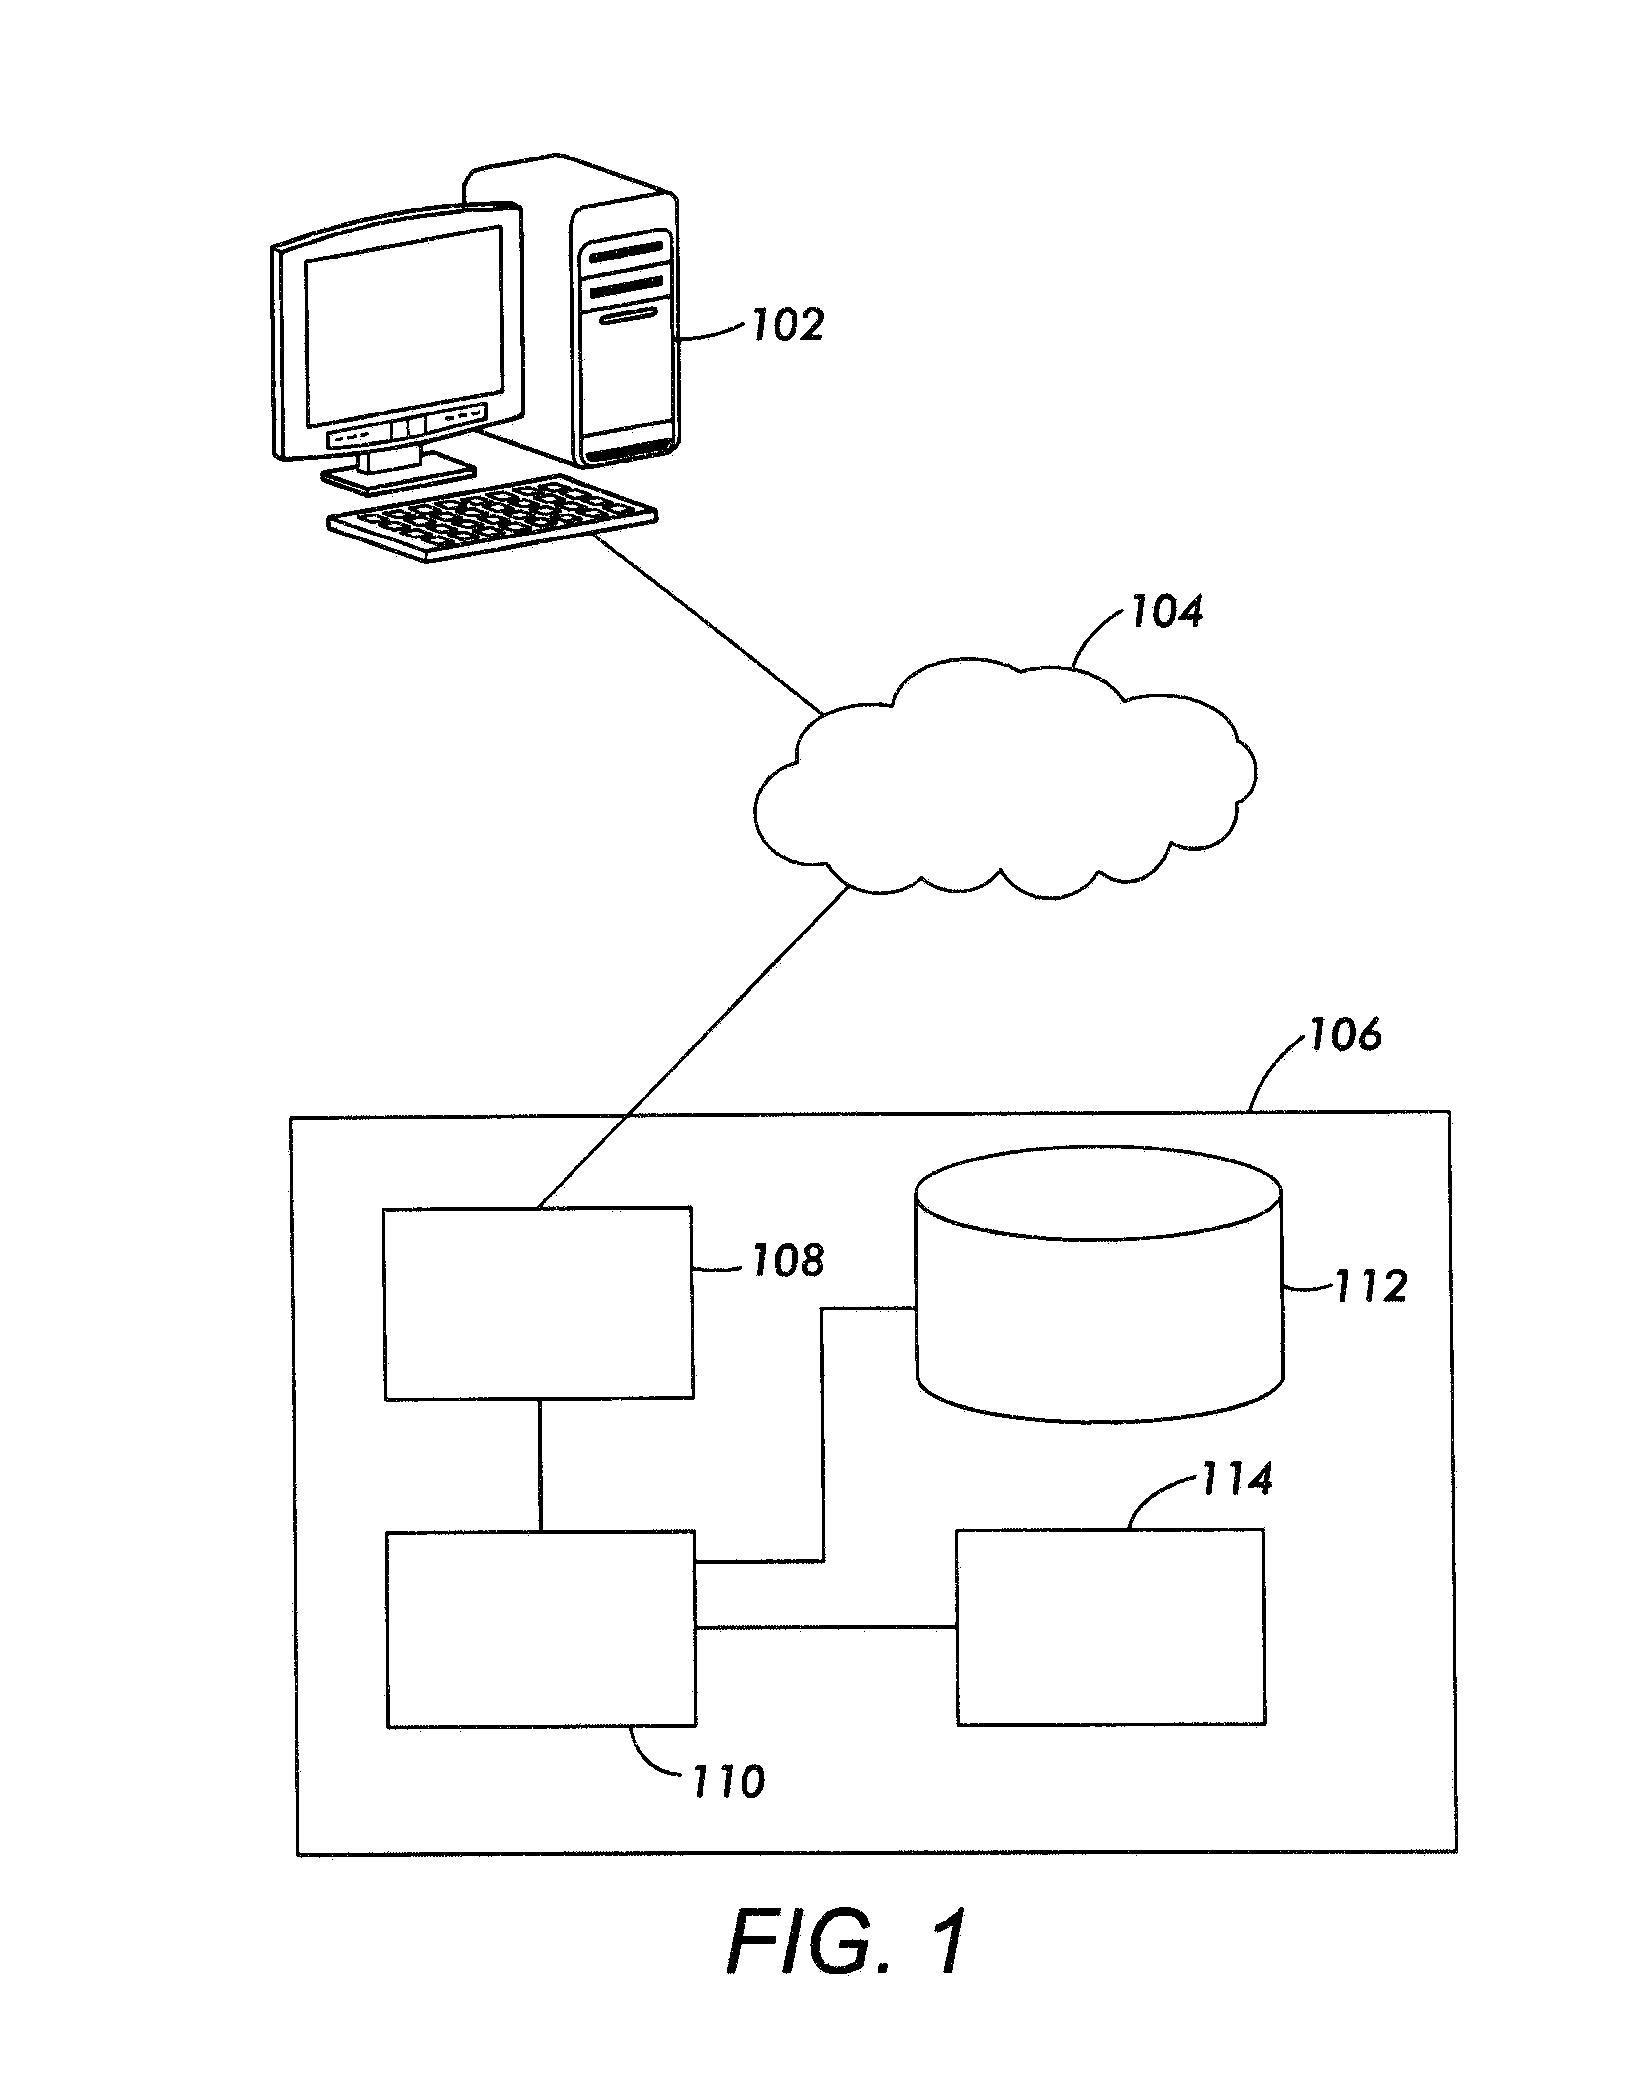 Systems and methods for efficient workflow similarity detection